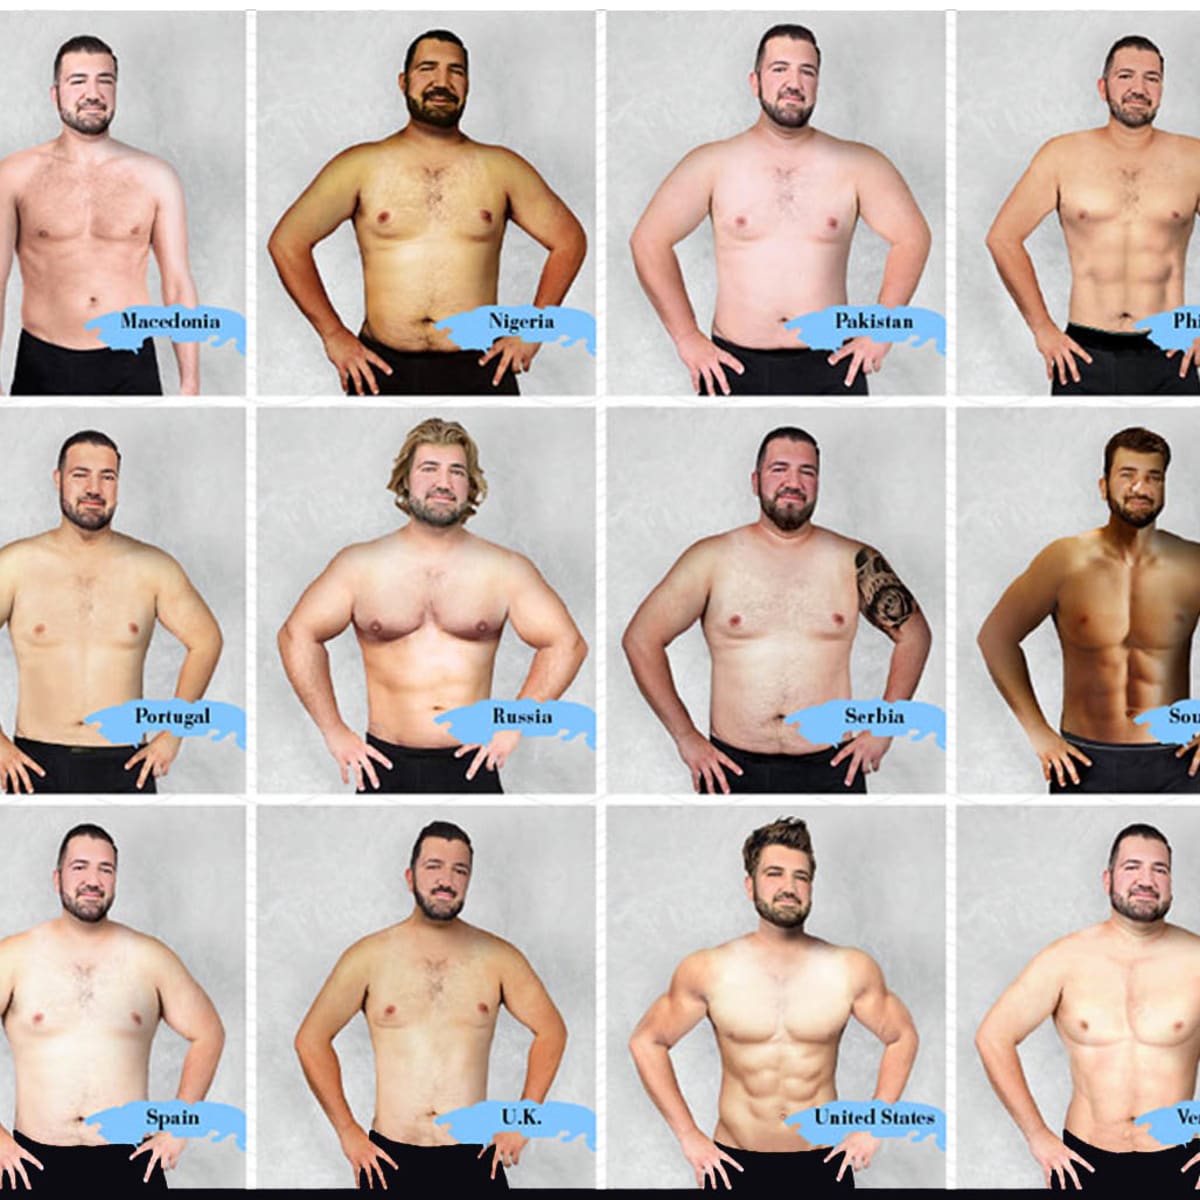 The Ideal Male Body in 19 Countries Around the World